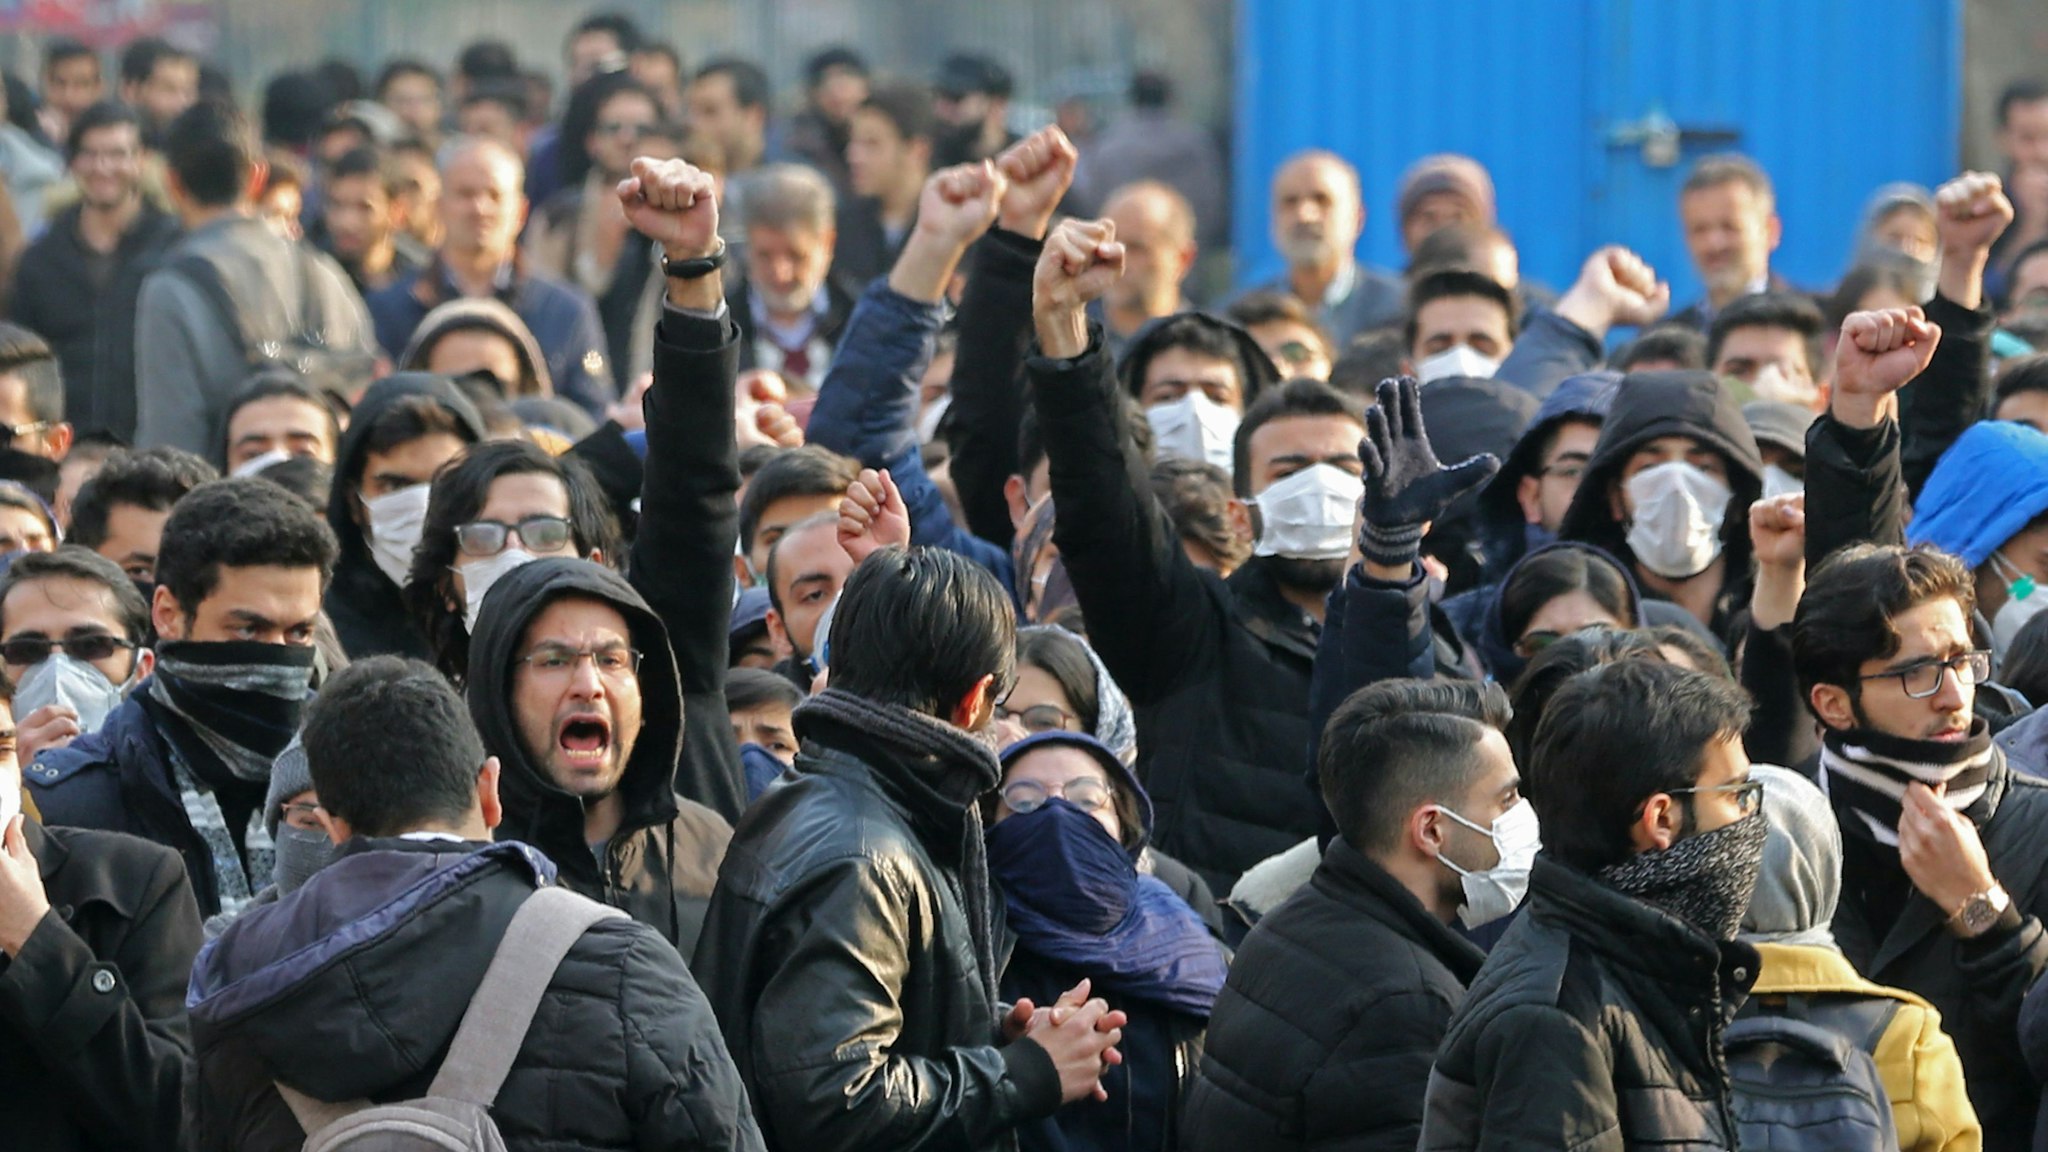 Iranian students gather for a demonstration over the downing of a Ukrainian airliner at Tehran University on January 14, 2020. - AFP correspondents said around 200 mainly masked students gathered at Tehran University and were locked in a tense standoff with youths from the Basij militia loyal to the establishment."Death to Britain," women clad in black chadours chanted as Basij members burned a cardboard cutout of the British ambassador to Tehran, Rob Macaire, after his brief arrest for allegedly attending a demonstration Saturday. Kept apart by security forces, the groups eventually parted ways.